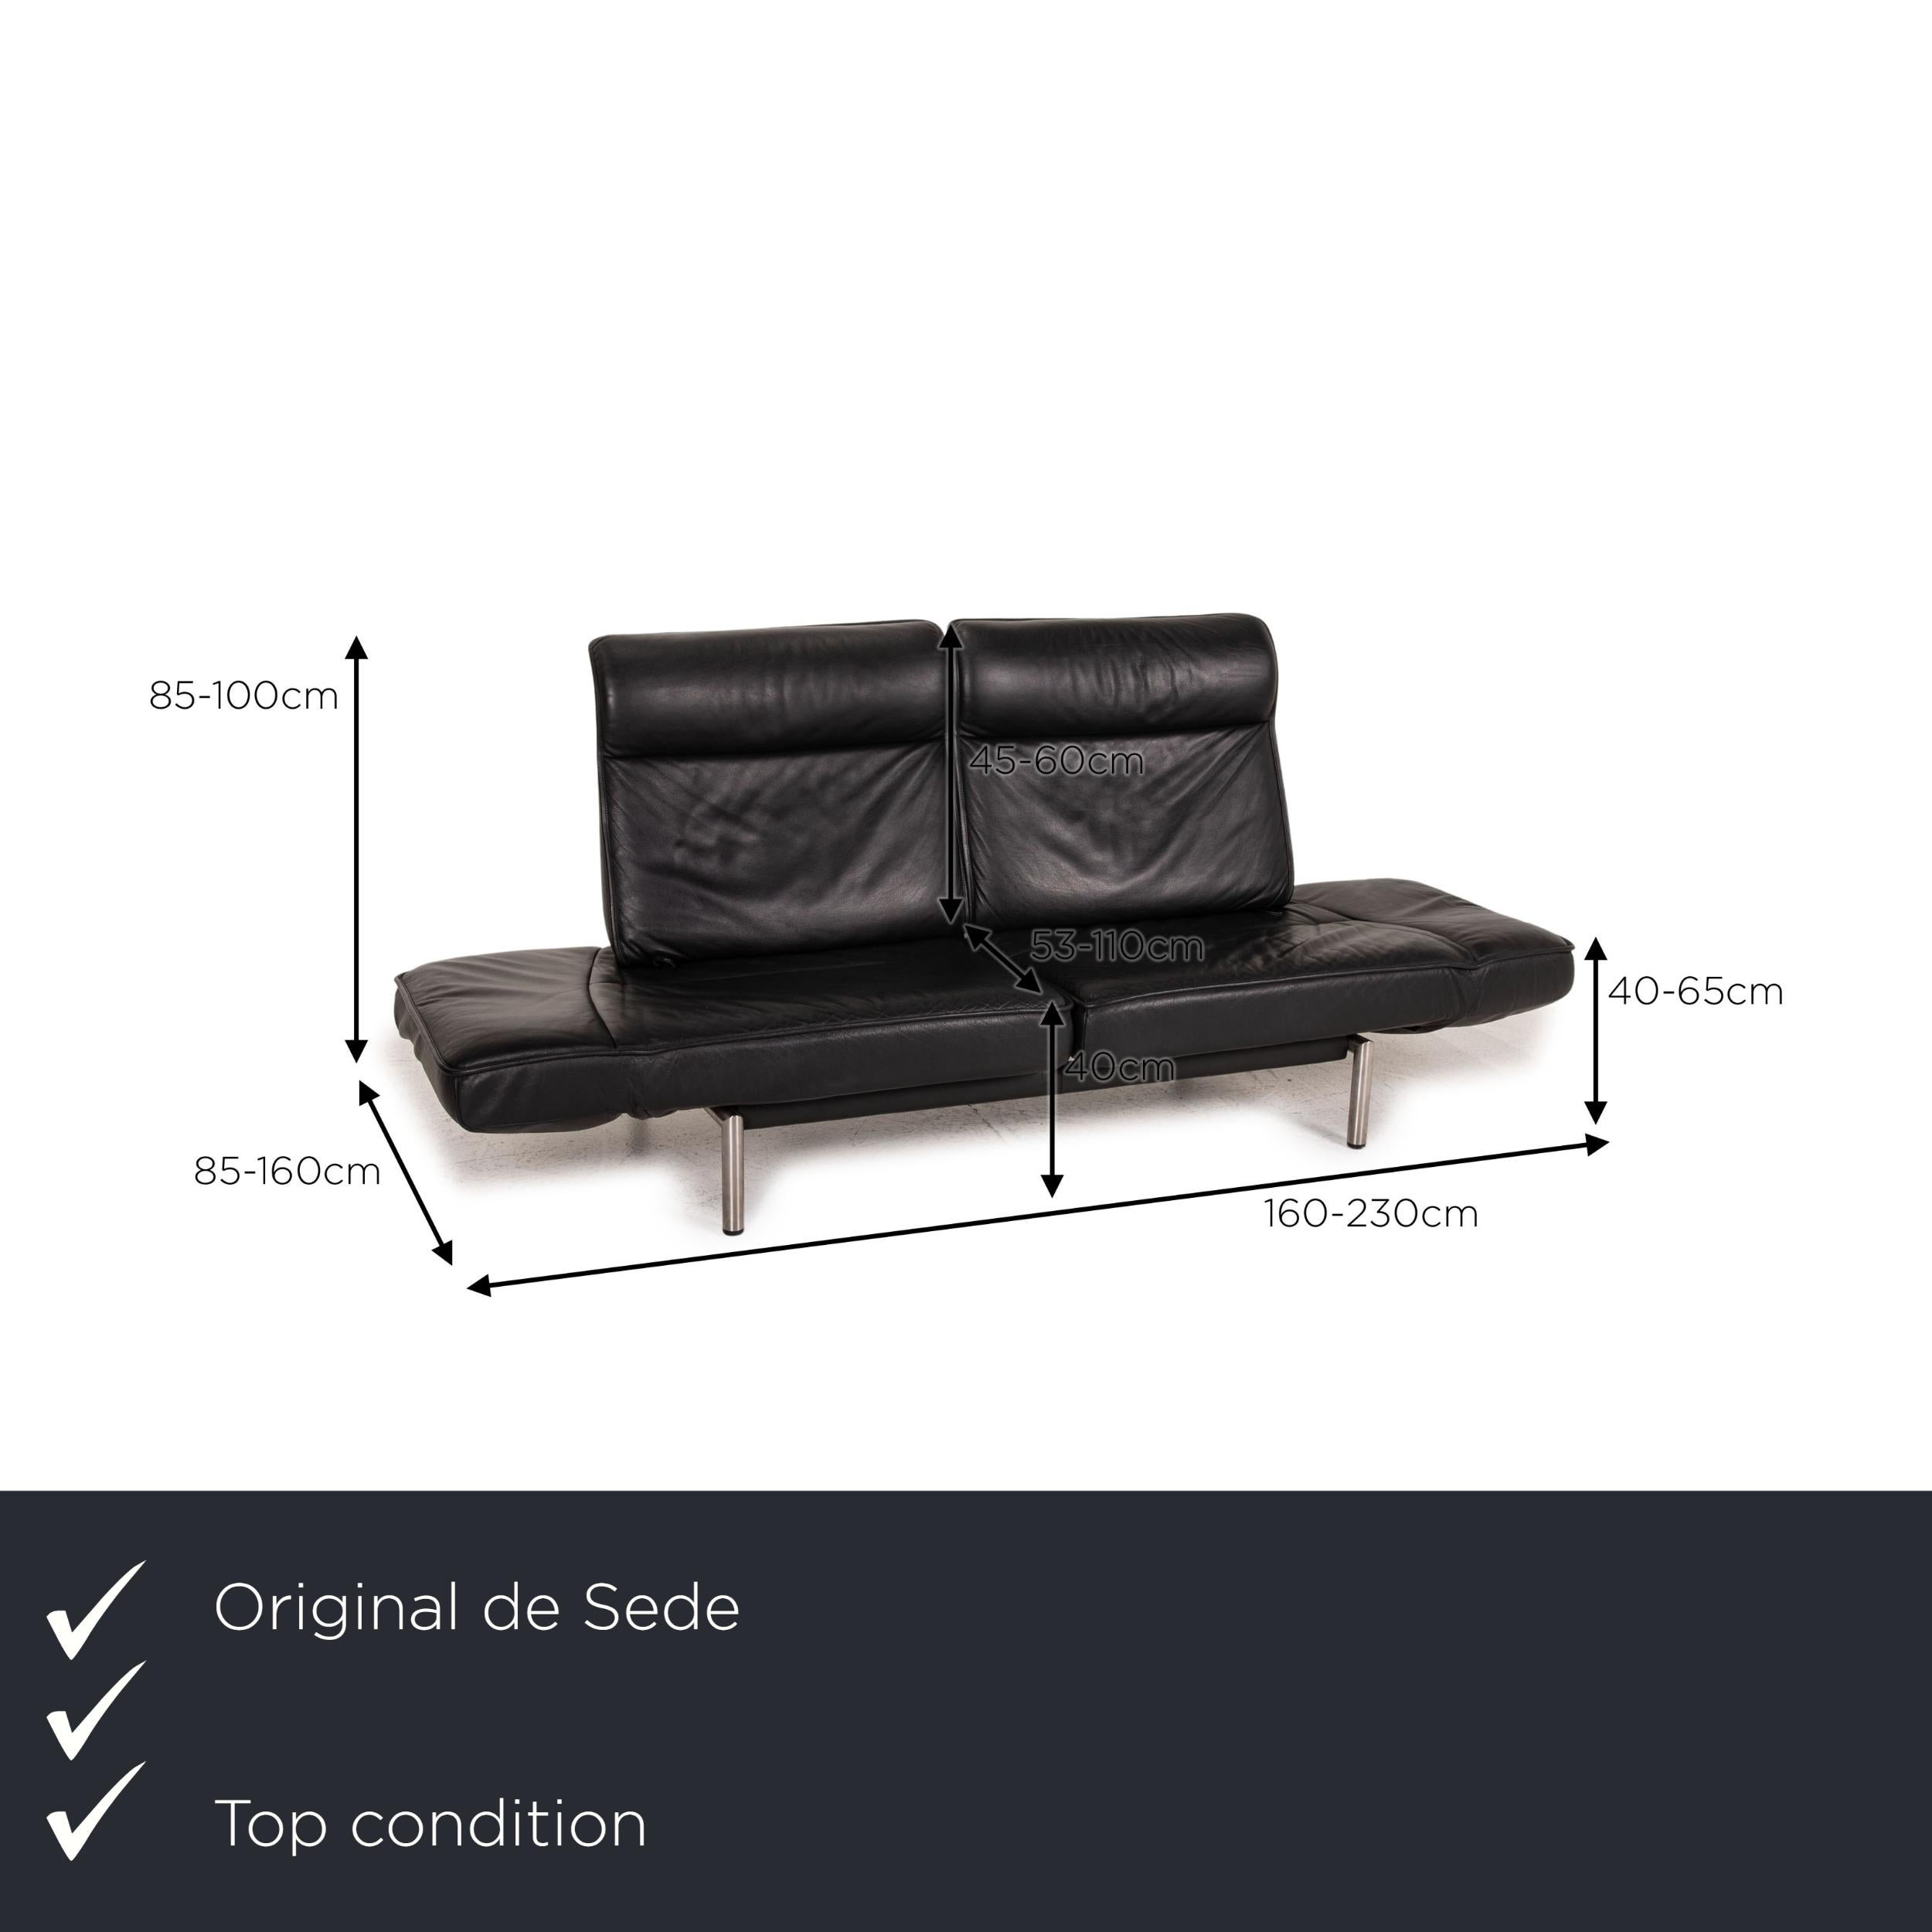 We present to you a De Sede DS 450 leather sofa black two-seater function.


 Product measurements in centimeters:
 

Depth: 85
Width: 160
Height: 85
Seat height: 40
Rest height: 40
Seat depth: 53
Seat width: 255
Back height: 45.
 